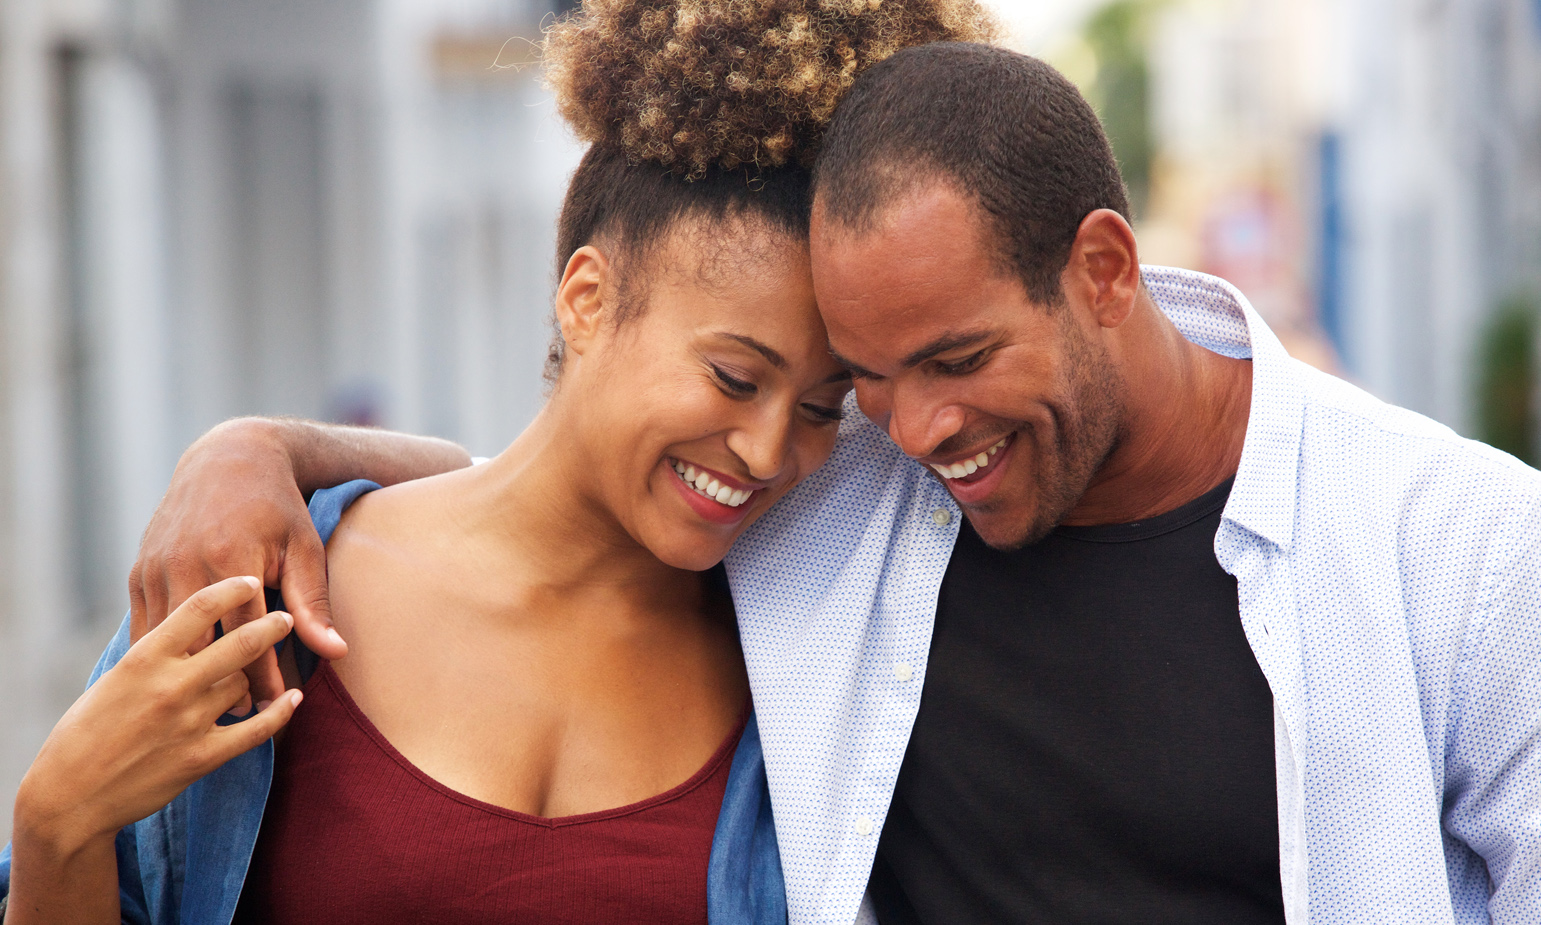 The perfect partner: how age affects what men and women find attractive